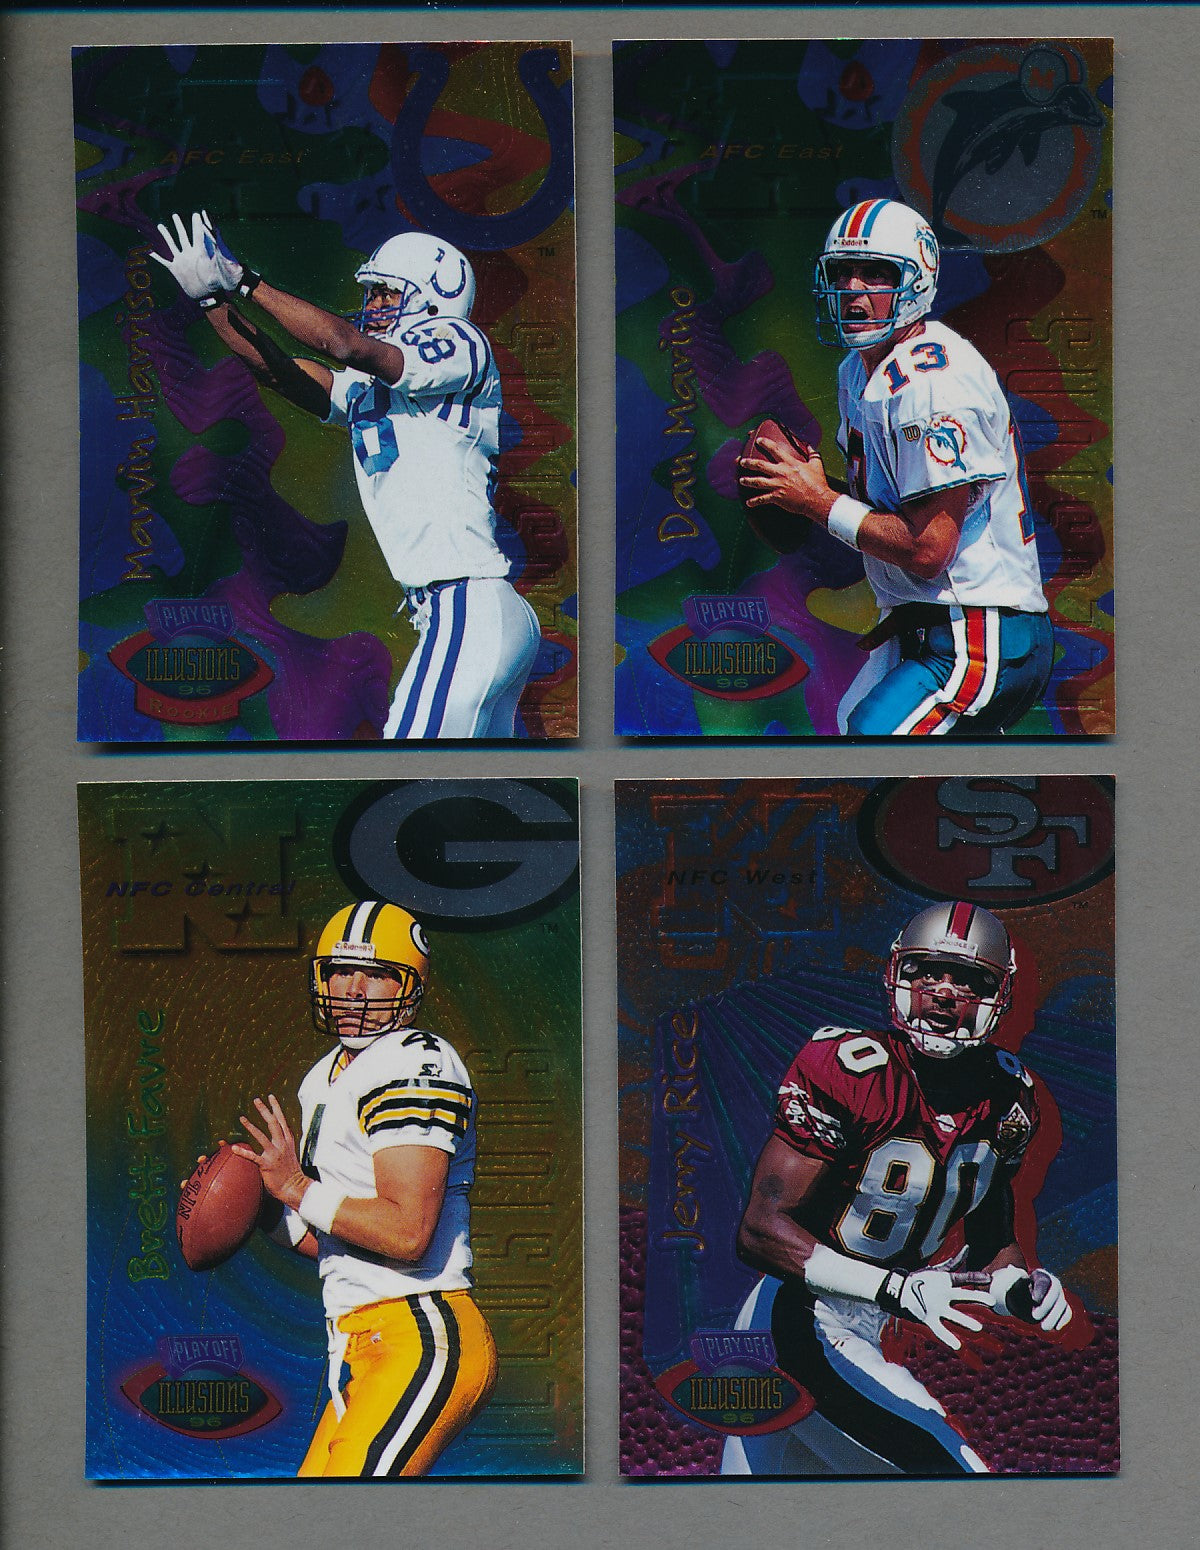 1996 Playoff Illusions Football Complete Set (120) NM/MT MT